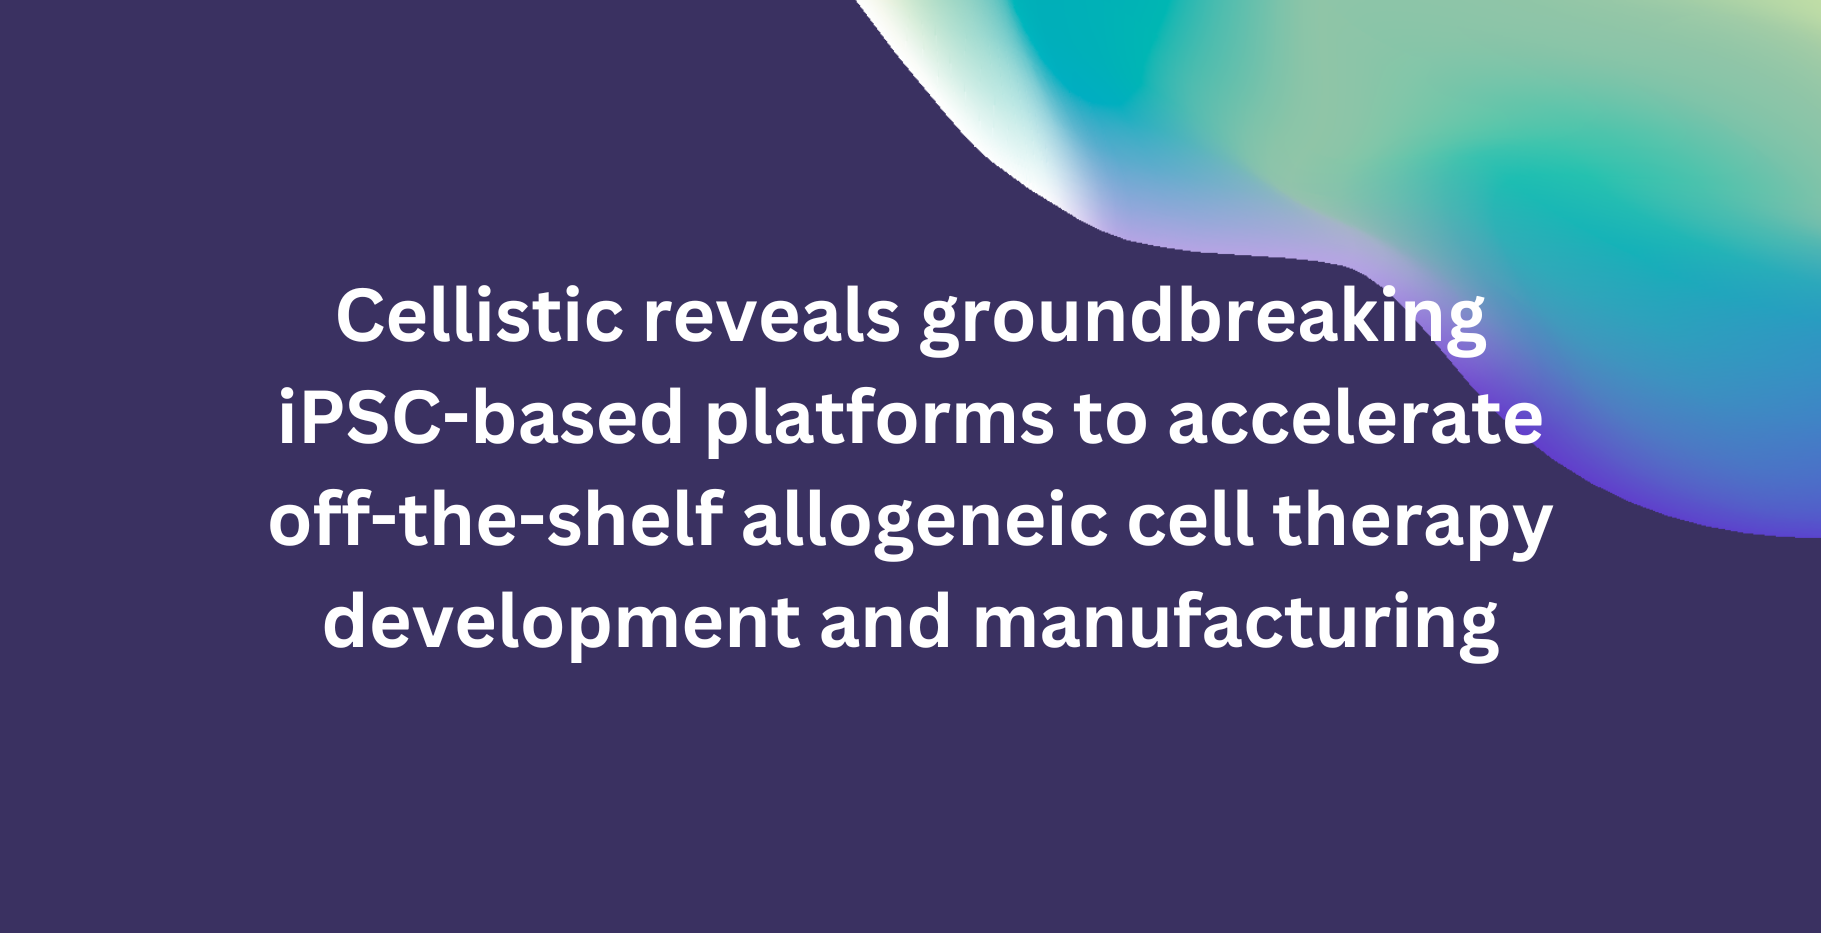 Cellistic reveals groundbreaking iPSC-based platforms to accelerate off-the-shelf allogeneic cell therapy development and manufacturing